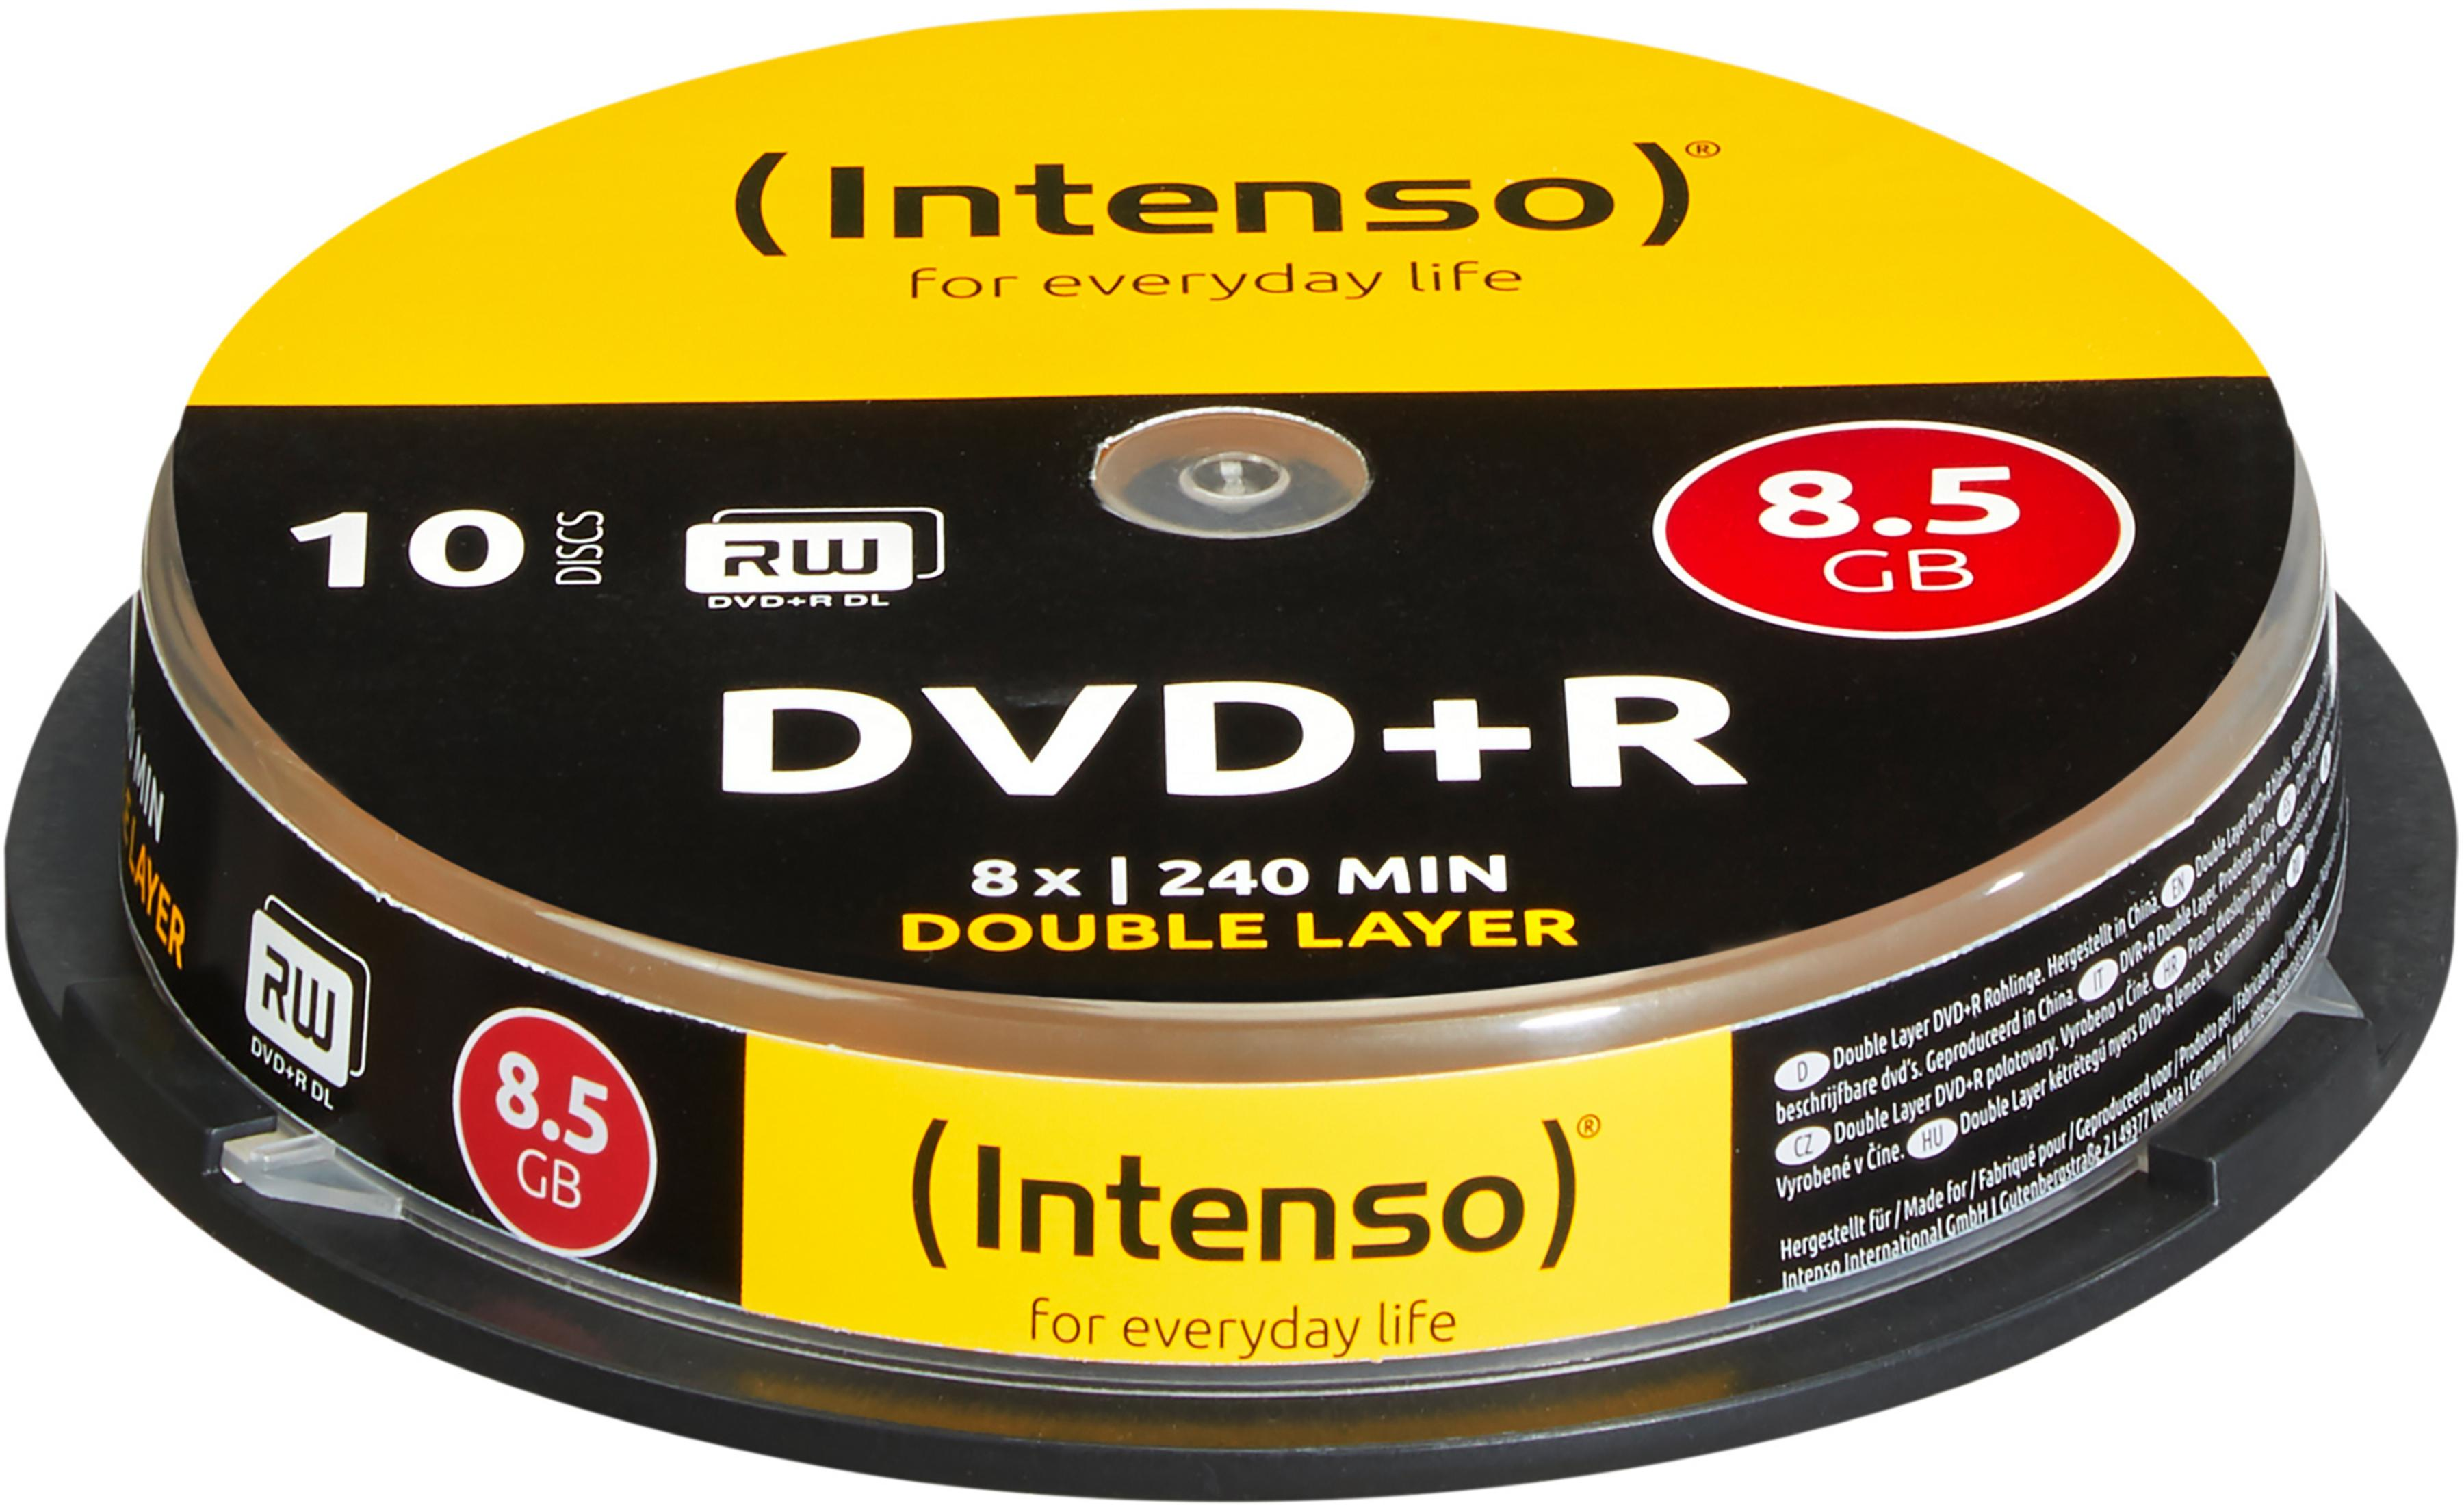 INTENSO 4311142 DVD+R DL 8X CB Double Layer DVD+R 10ER Rohlinge